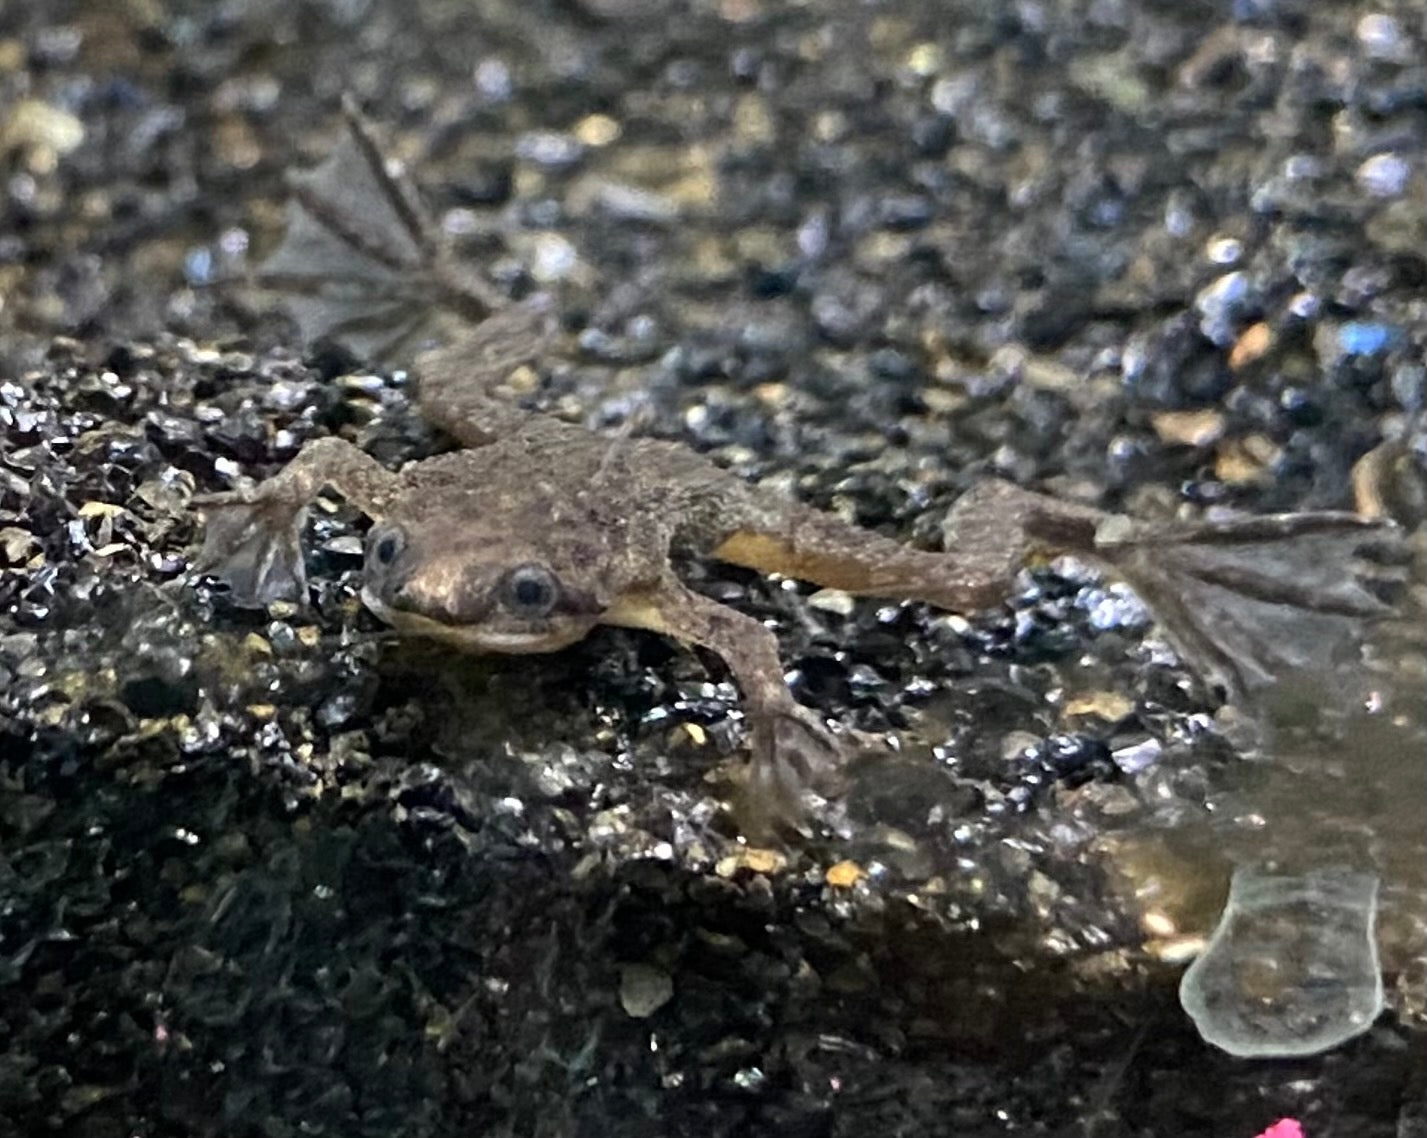 Front view of an African Dwarf Frog.